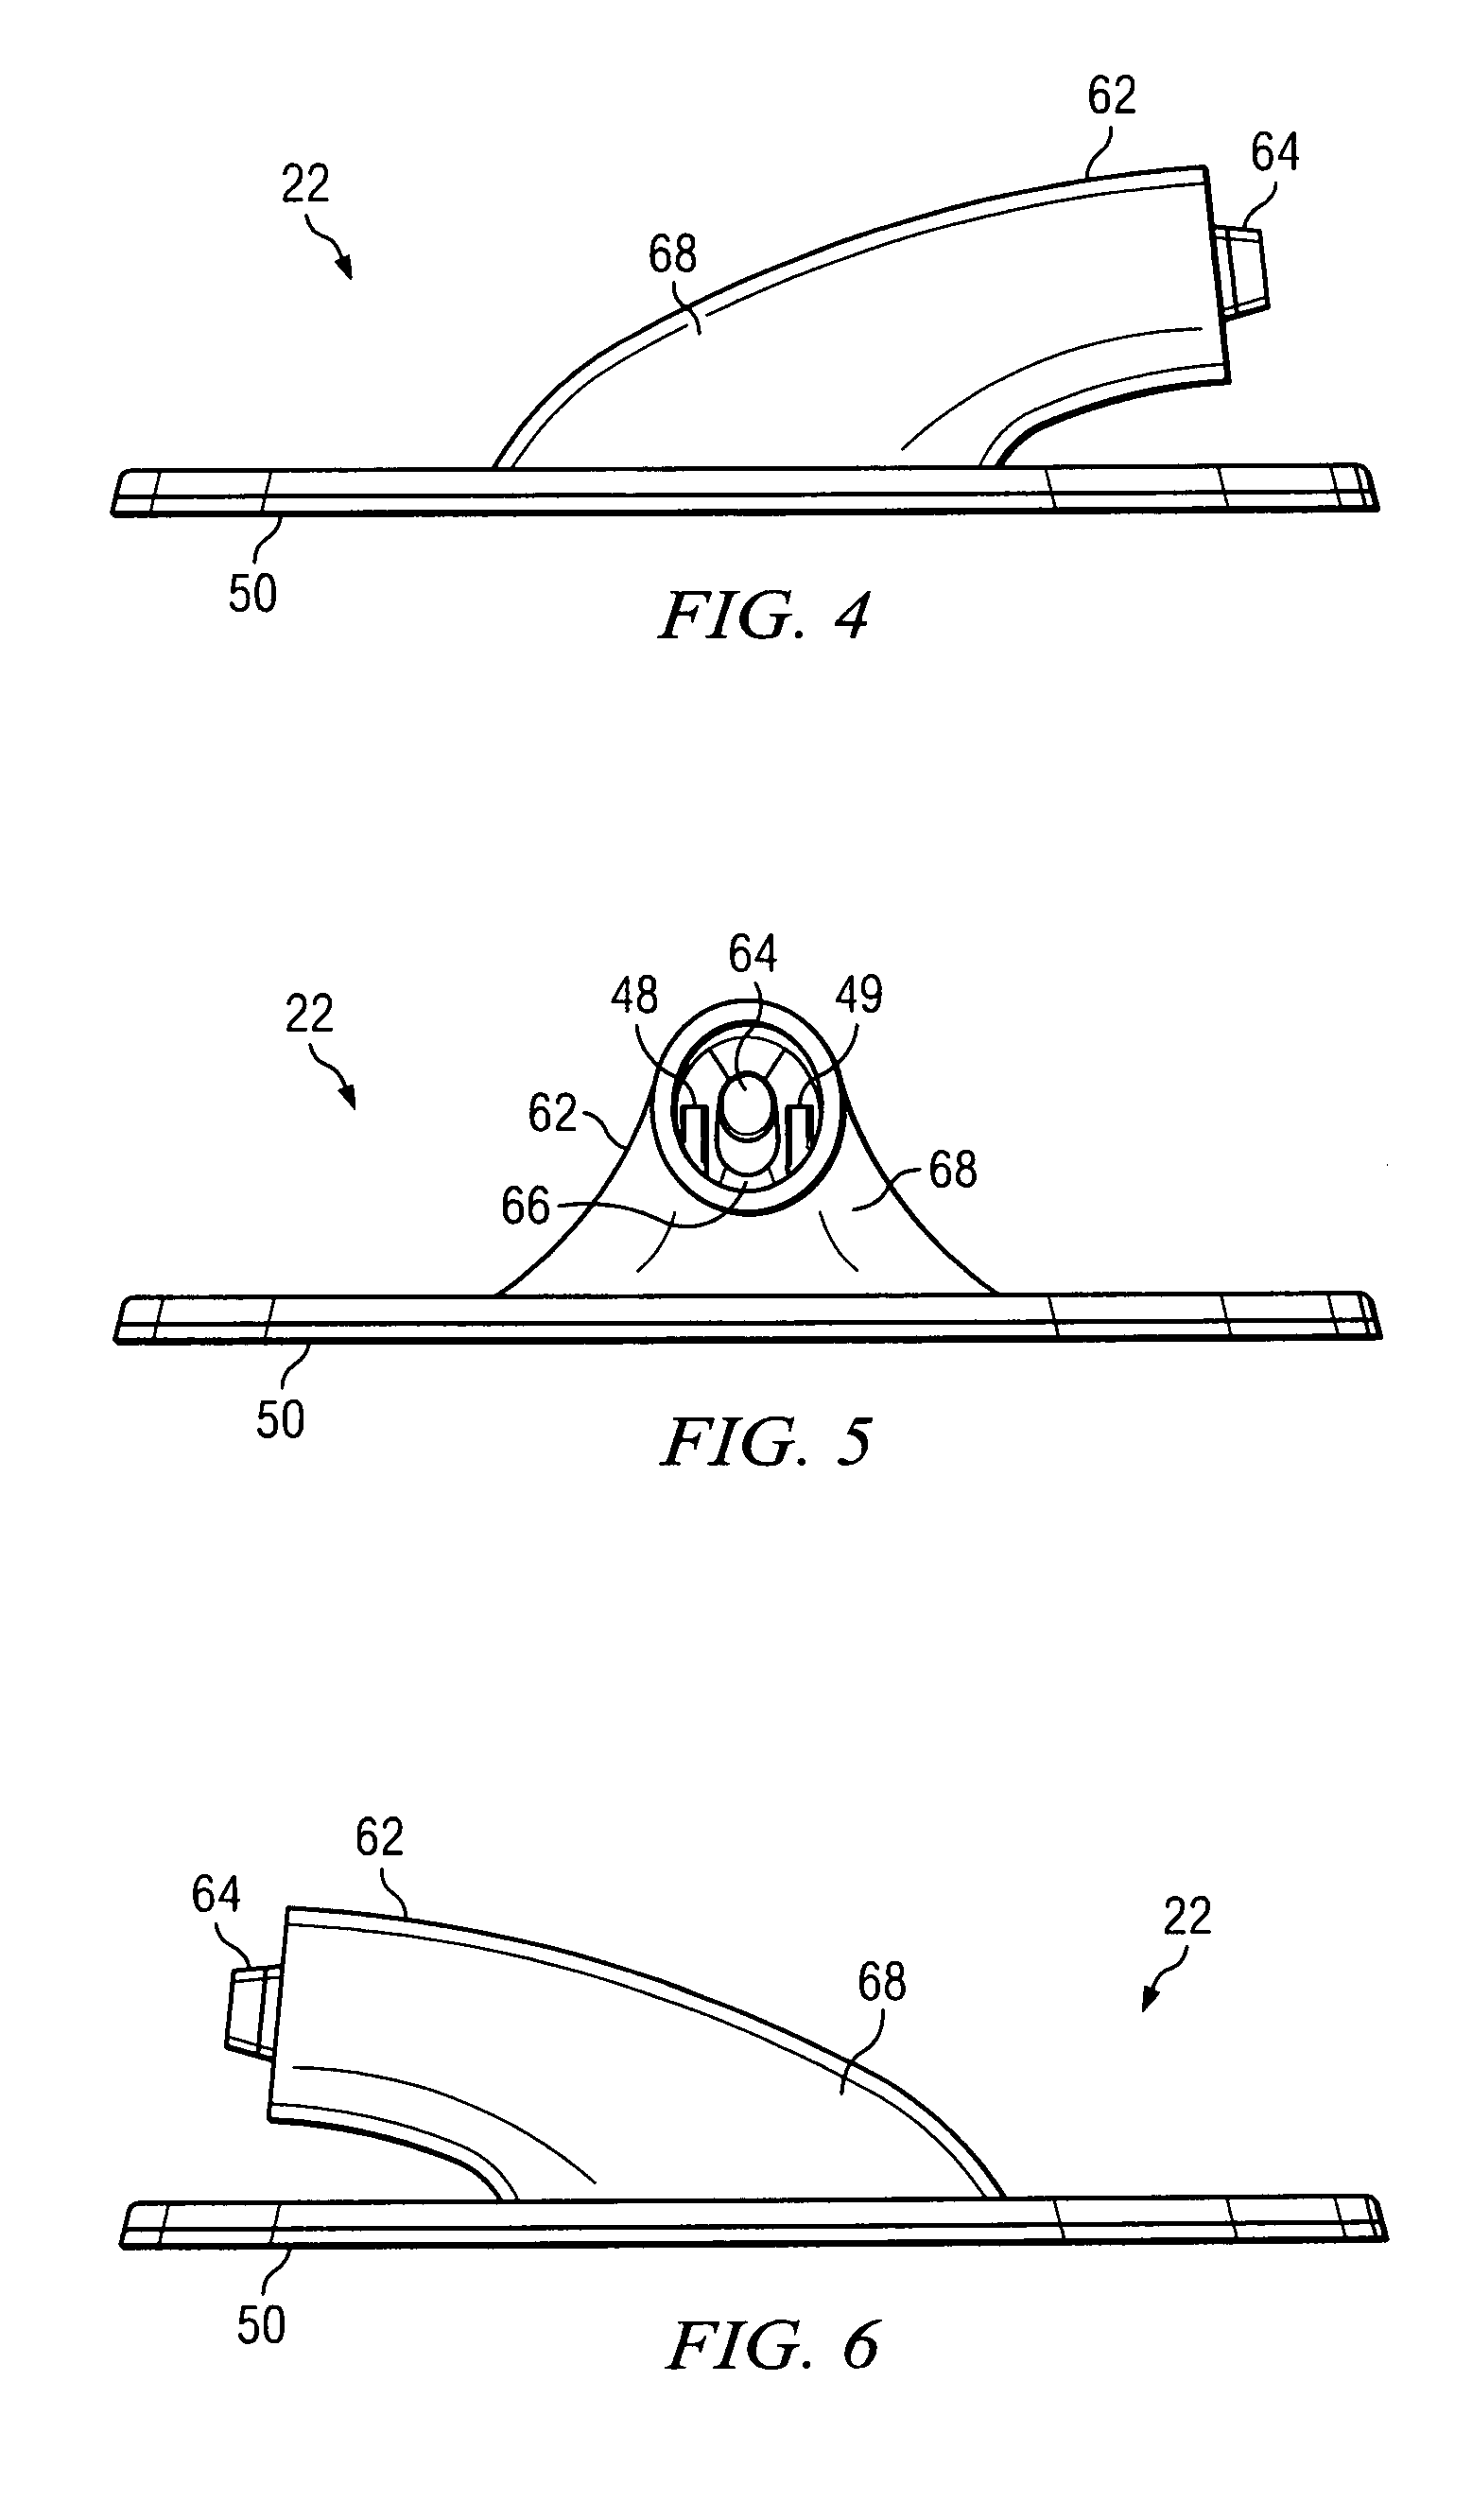 Systems and methods for improved connection to wound dressings in conjunction with reduced pressure wound treatment systems